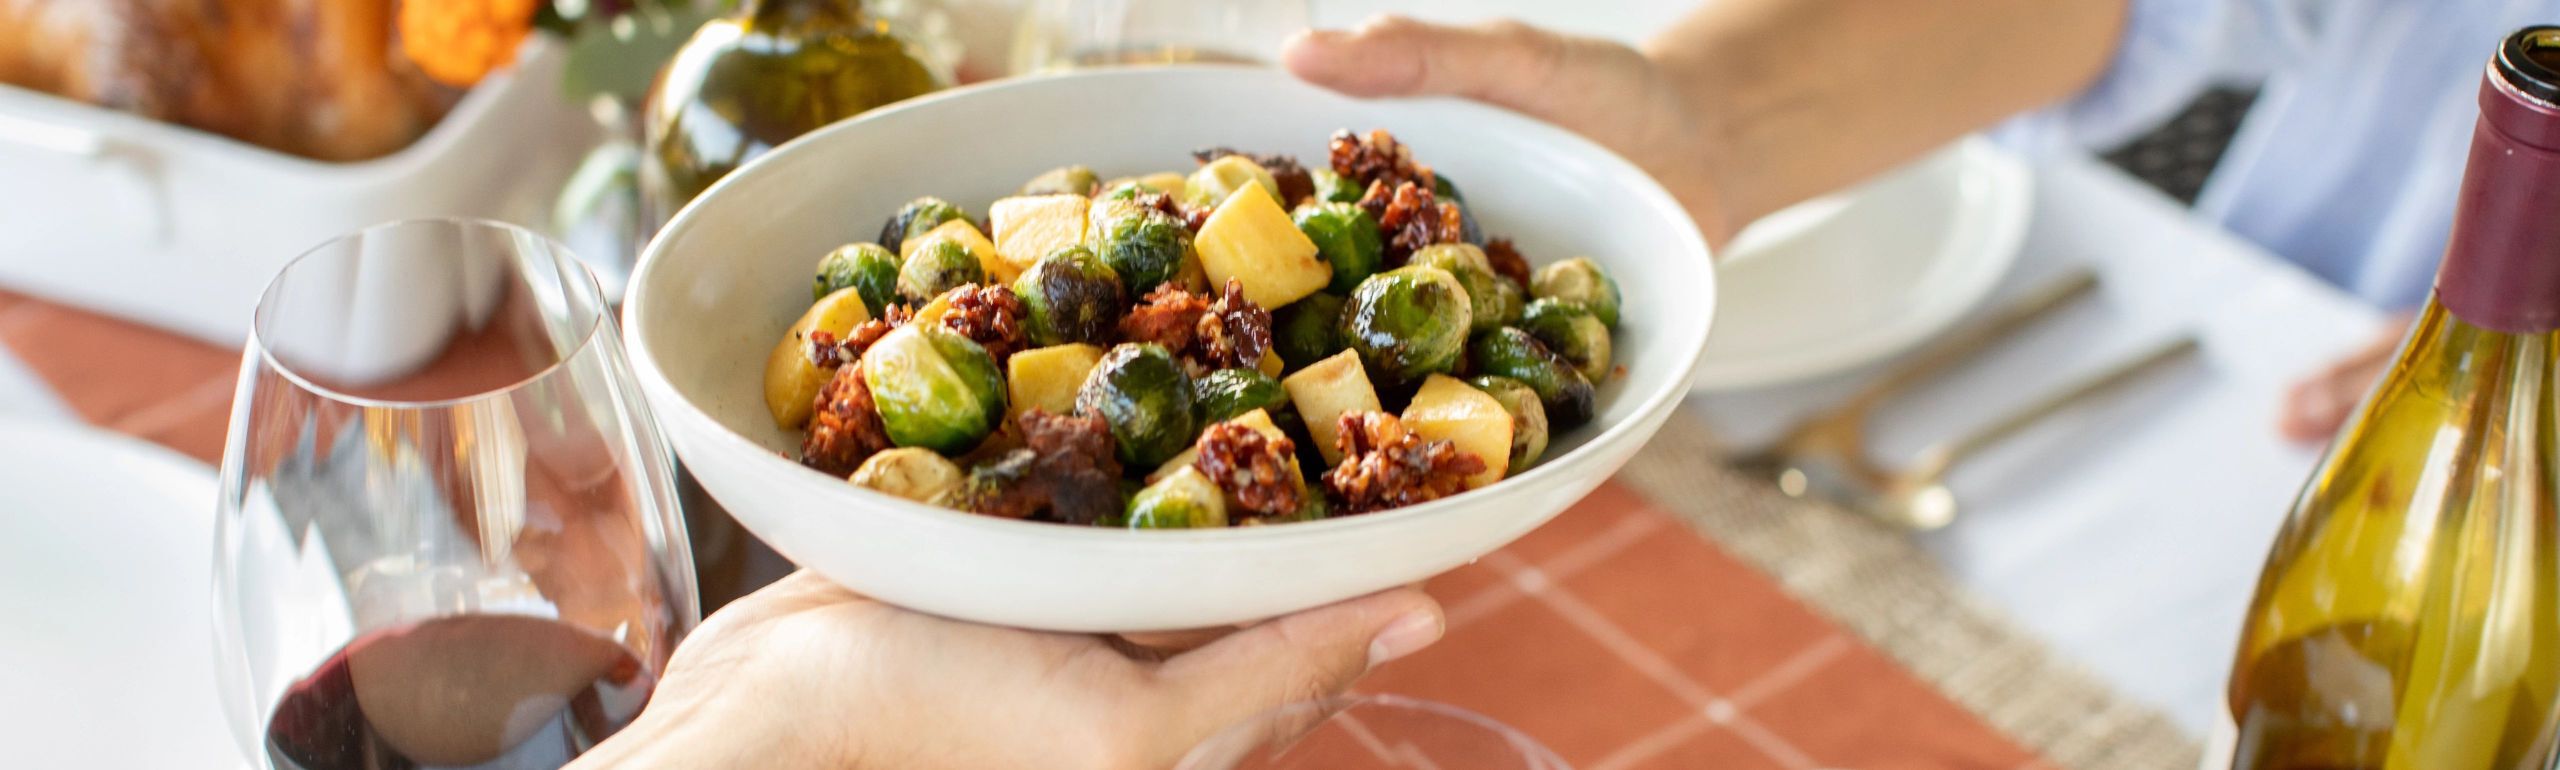 Seared Brussels Sprouts